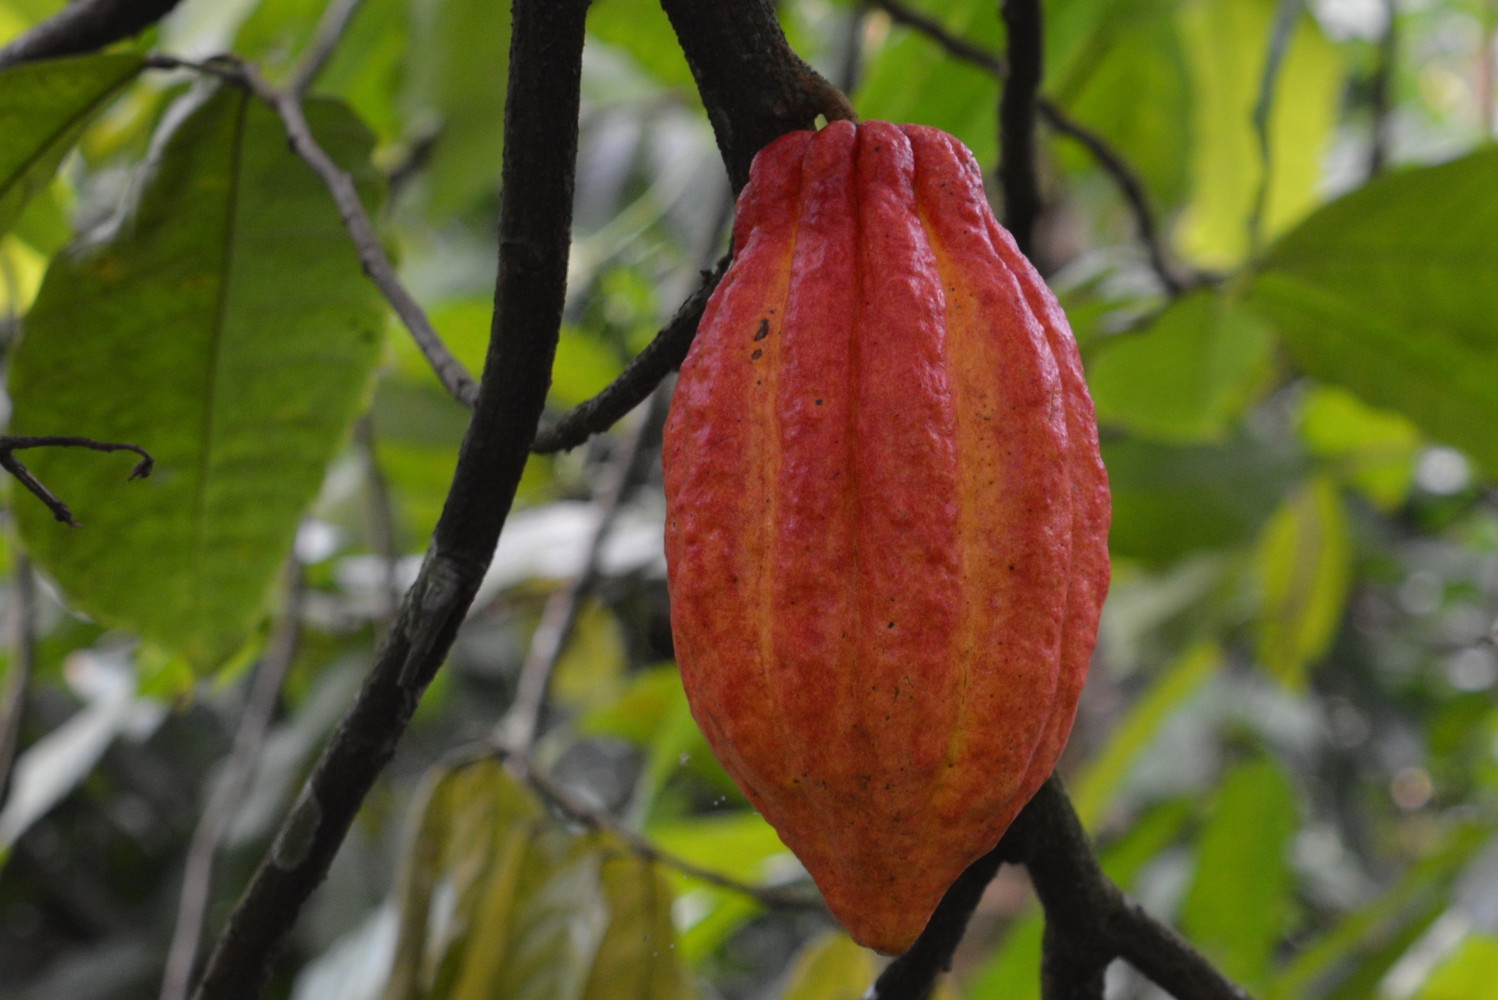 A ripe cocoa pod hanging from a branch of a tree